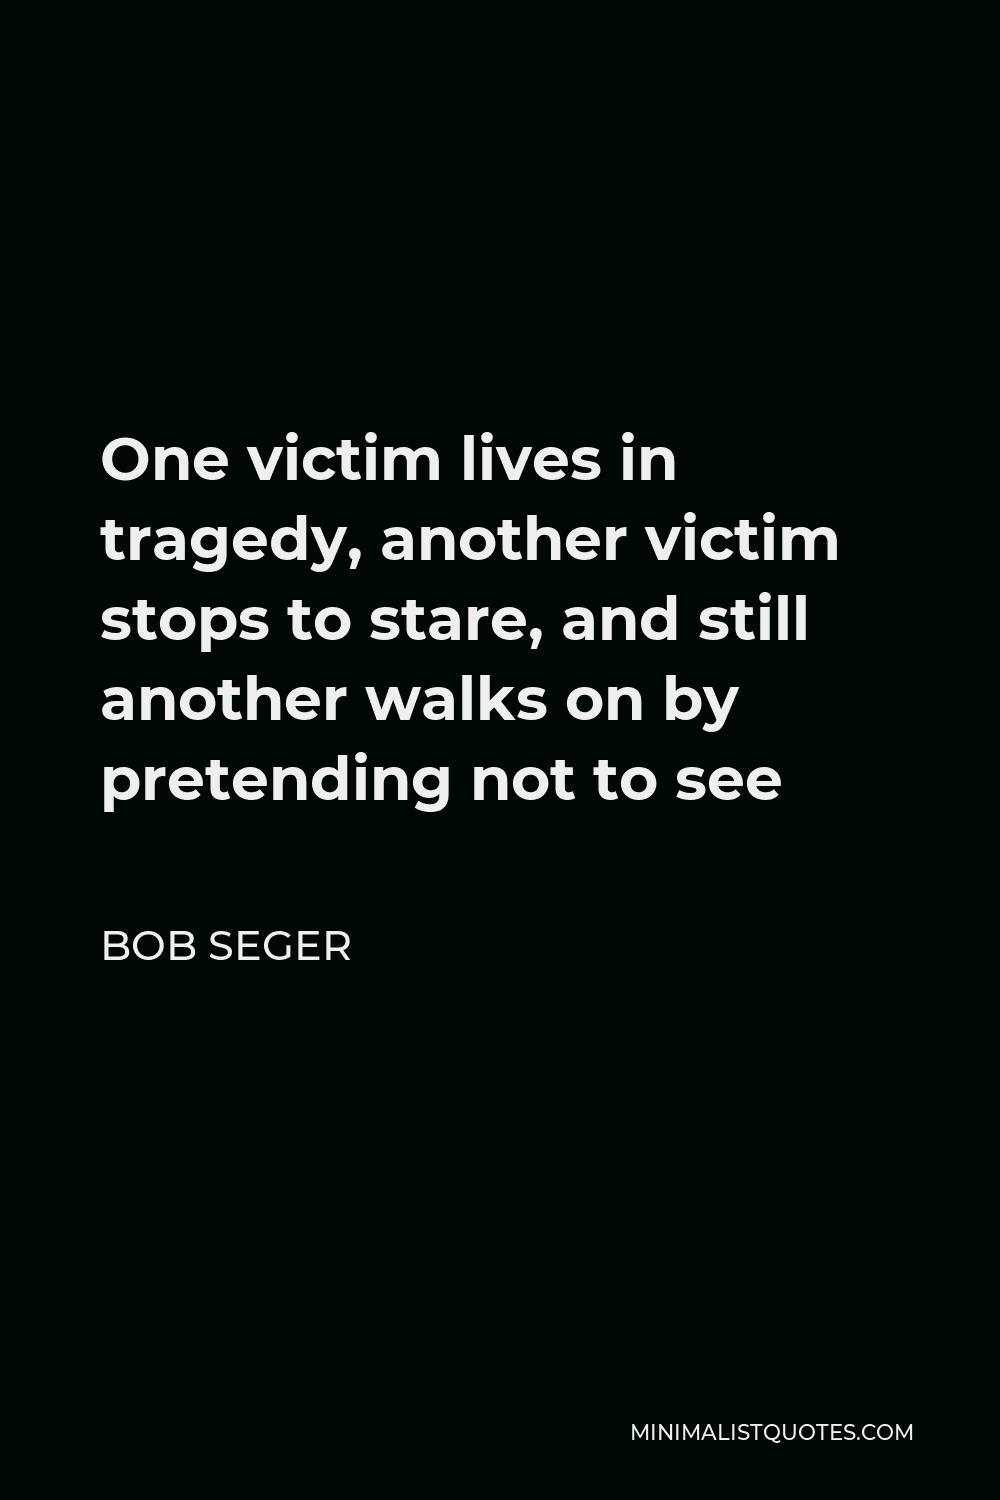 Bob Seger Quote - One victim lives in tragedy, another victim stops to stare, and still another walks on by pretending not to see